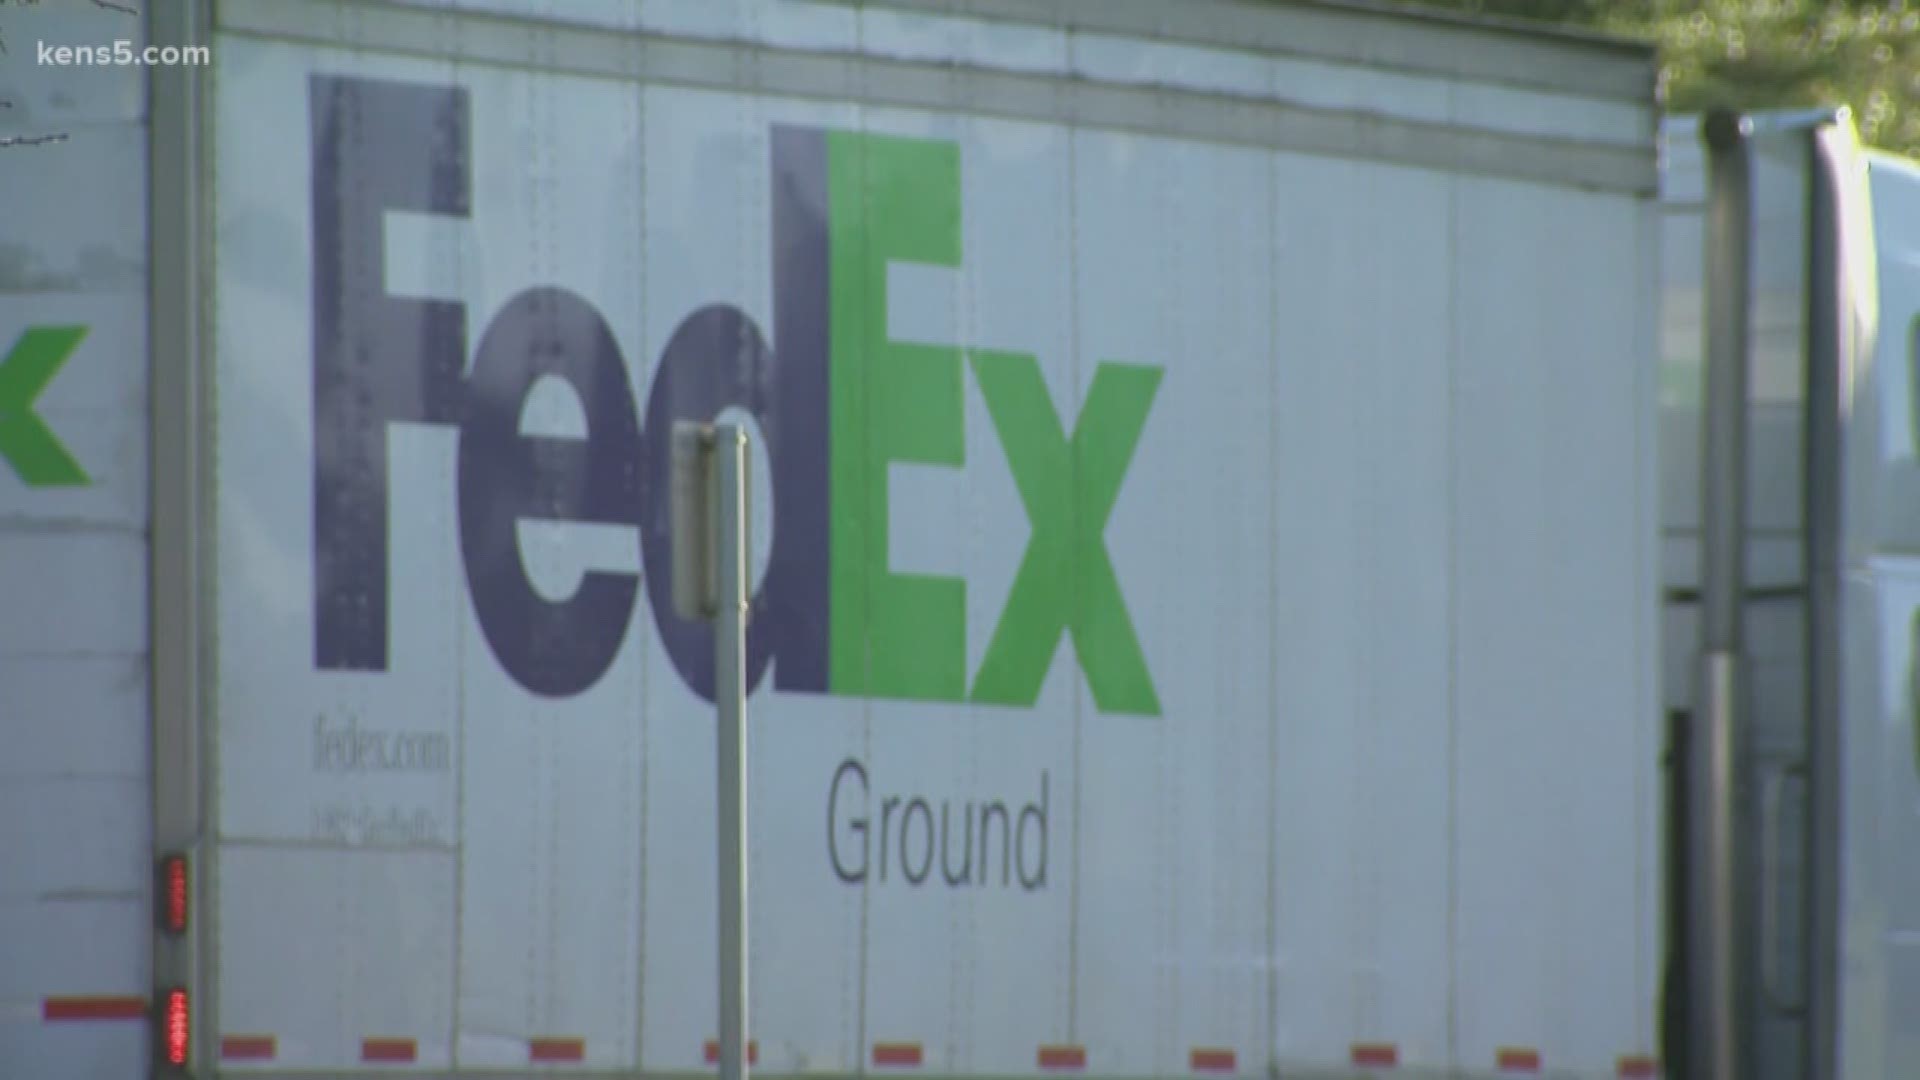 Roads are back open around the Schertz facility where a FedEx package exploded early Tuesday morning. Employees affected by expressed their shock and outrage over the crime.